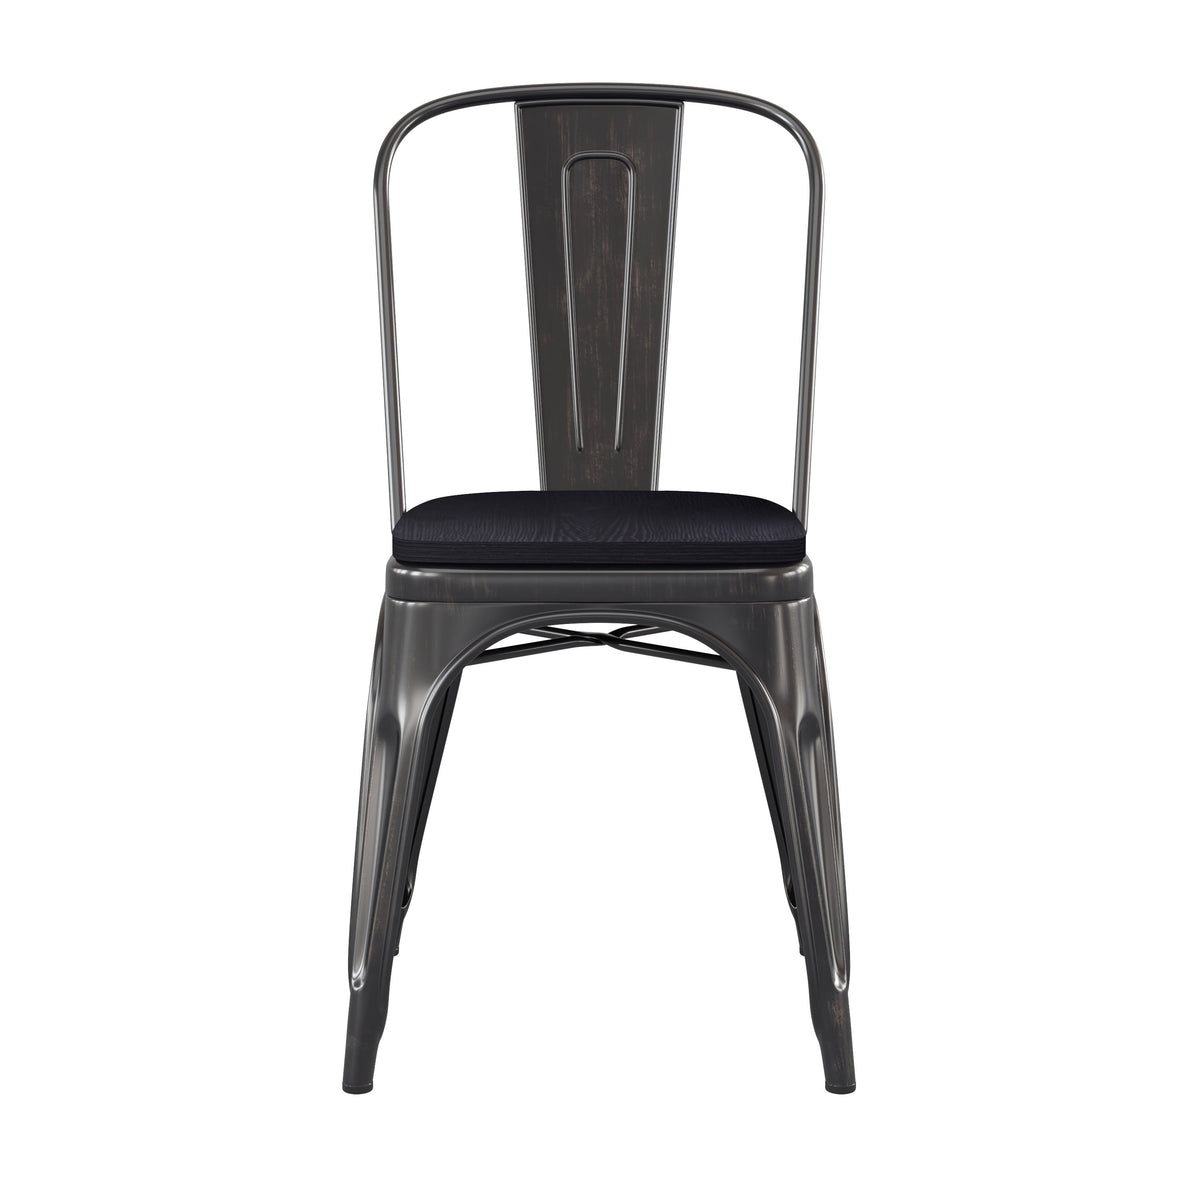 Black-Antique Gold/Black |#| All-Weather Commercial Stack Chair & Poly Resin Seat - Black-Antique Gold/Black